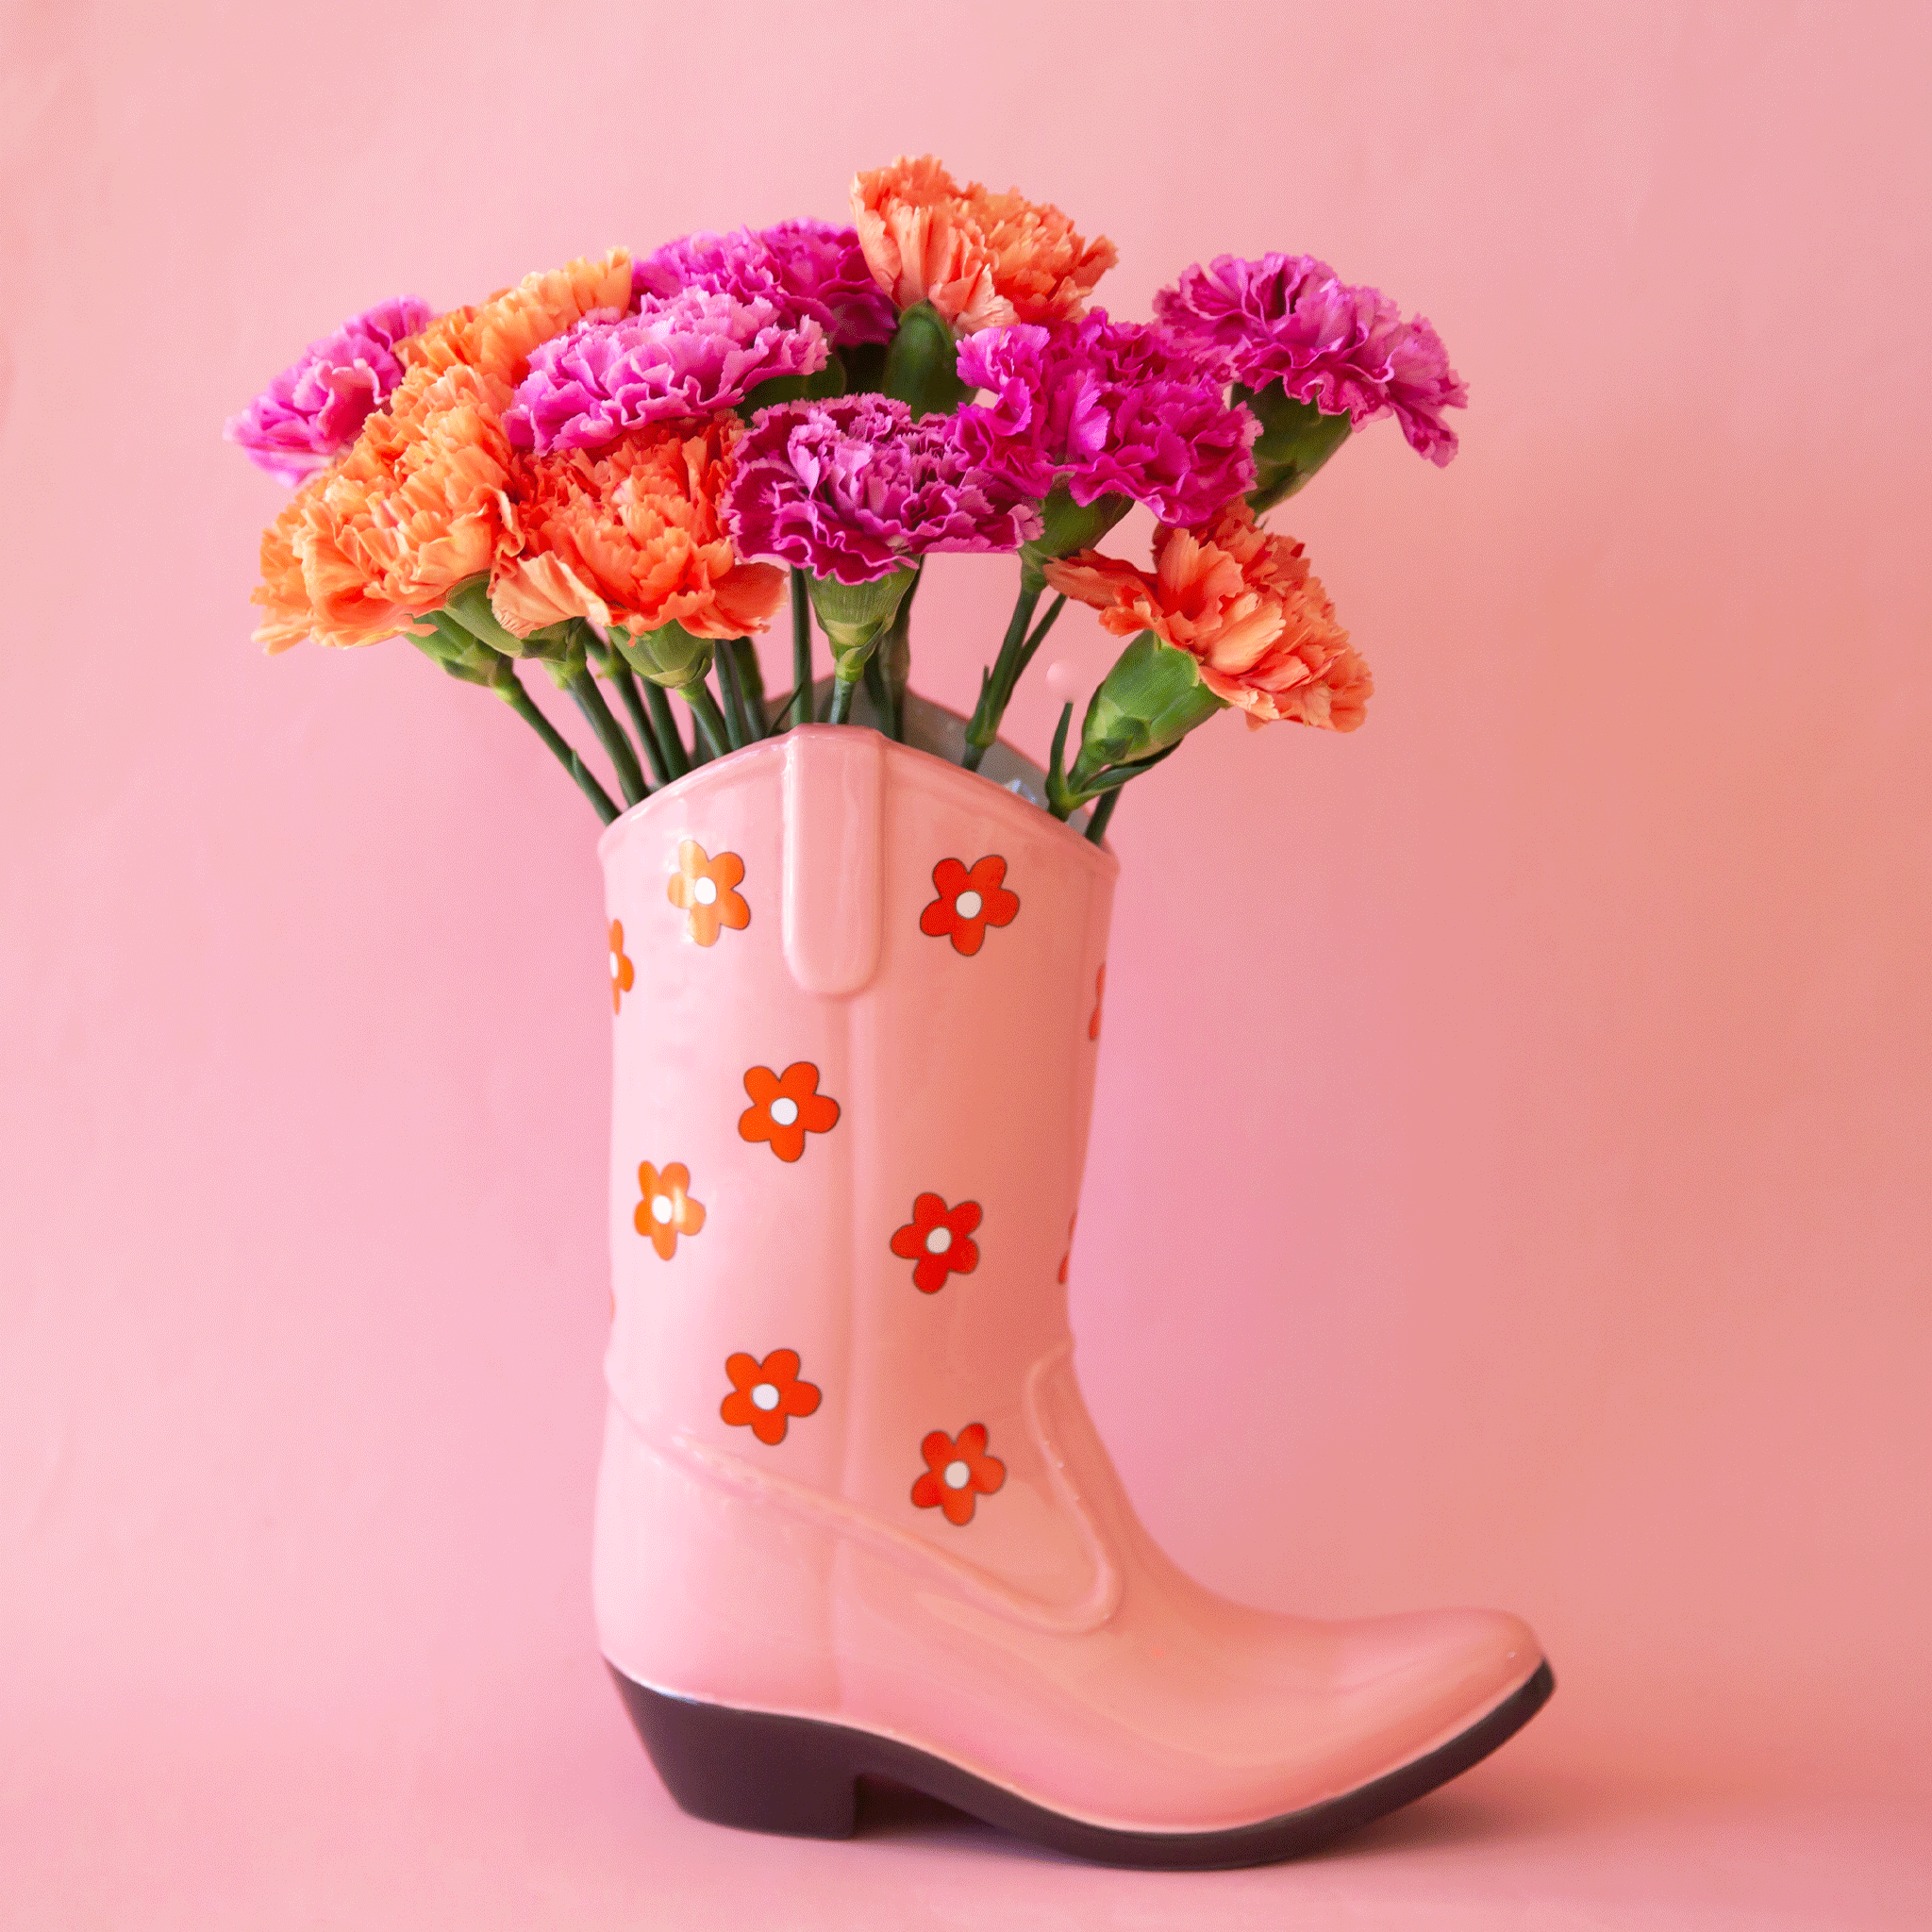 On a pink background is a pink cowboy boot shaped vase with a red and white daisy print on it. Flowers pictured not included with purchase.